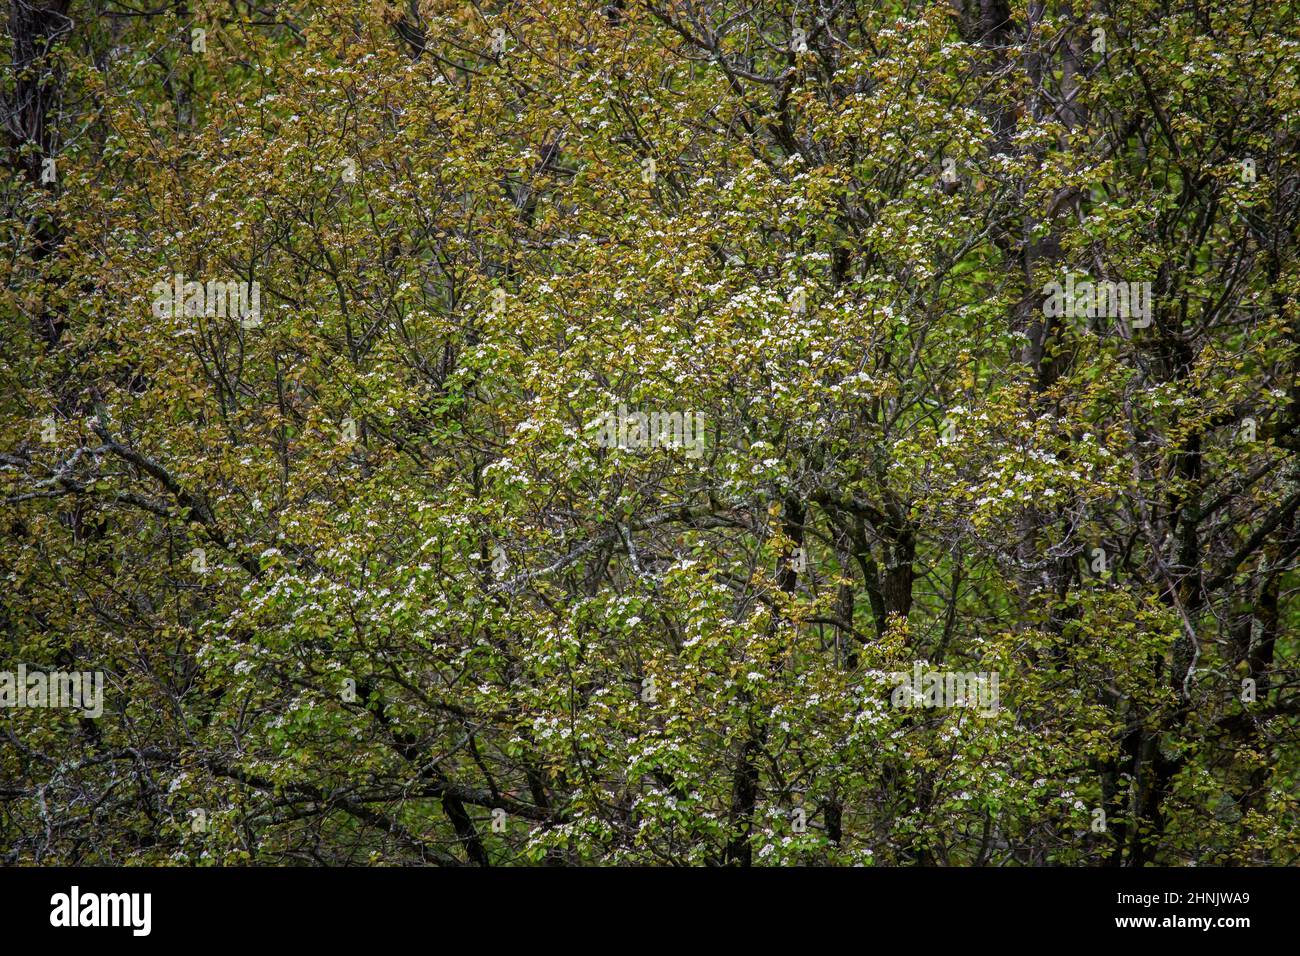 A thicket of various species of hawthorn trees on former farmland in Pennsylvania's Pocono Mountains Stock Photo